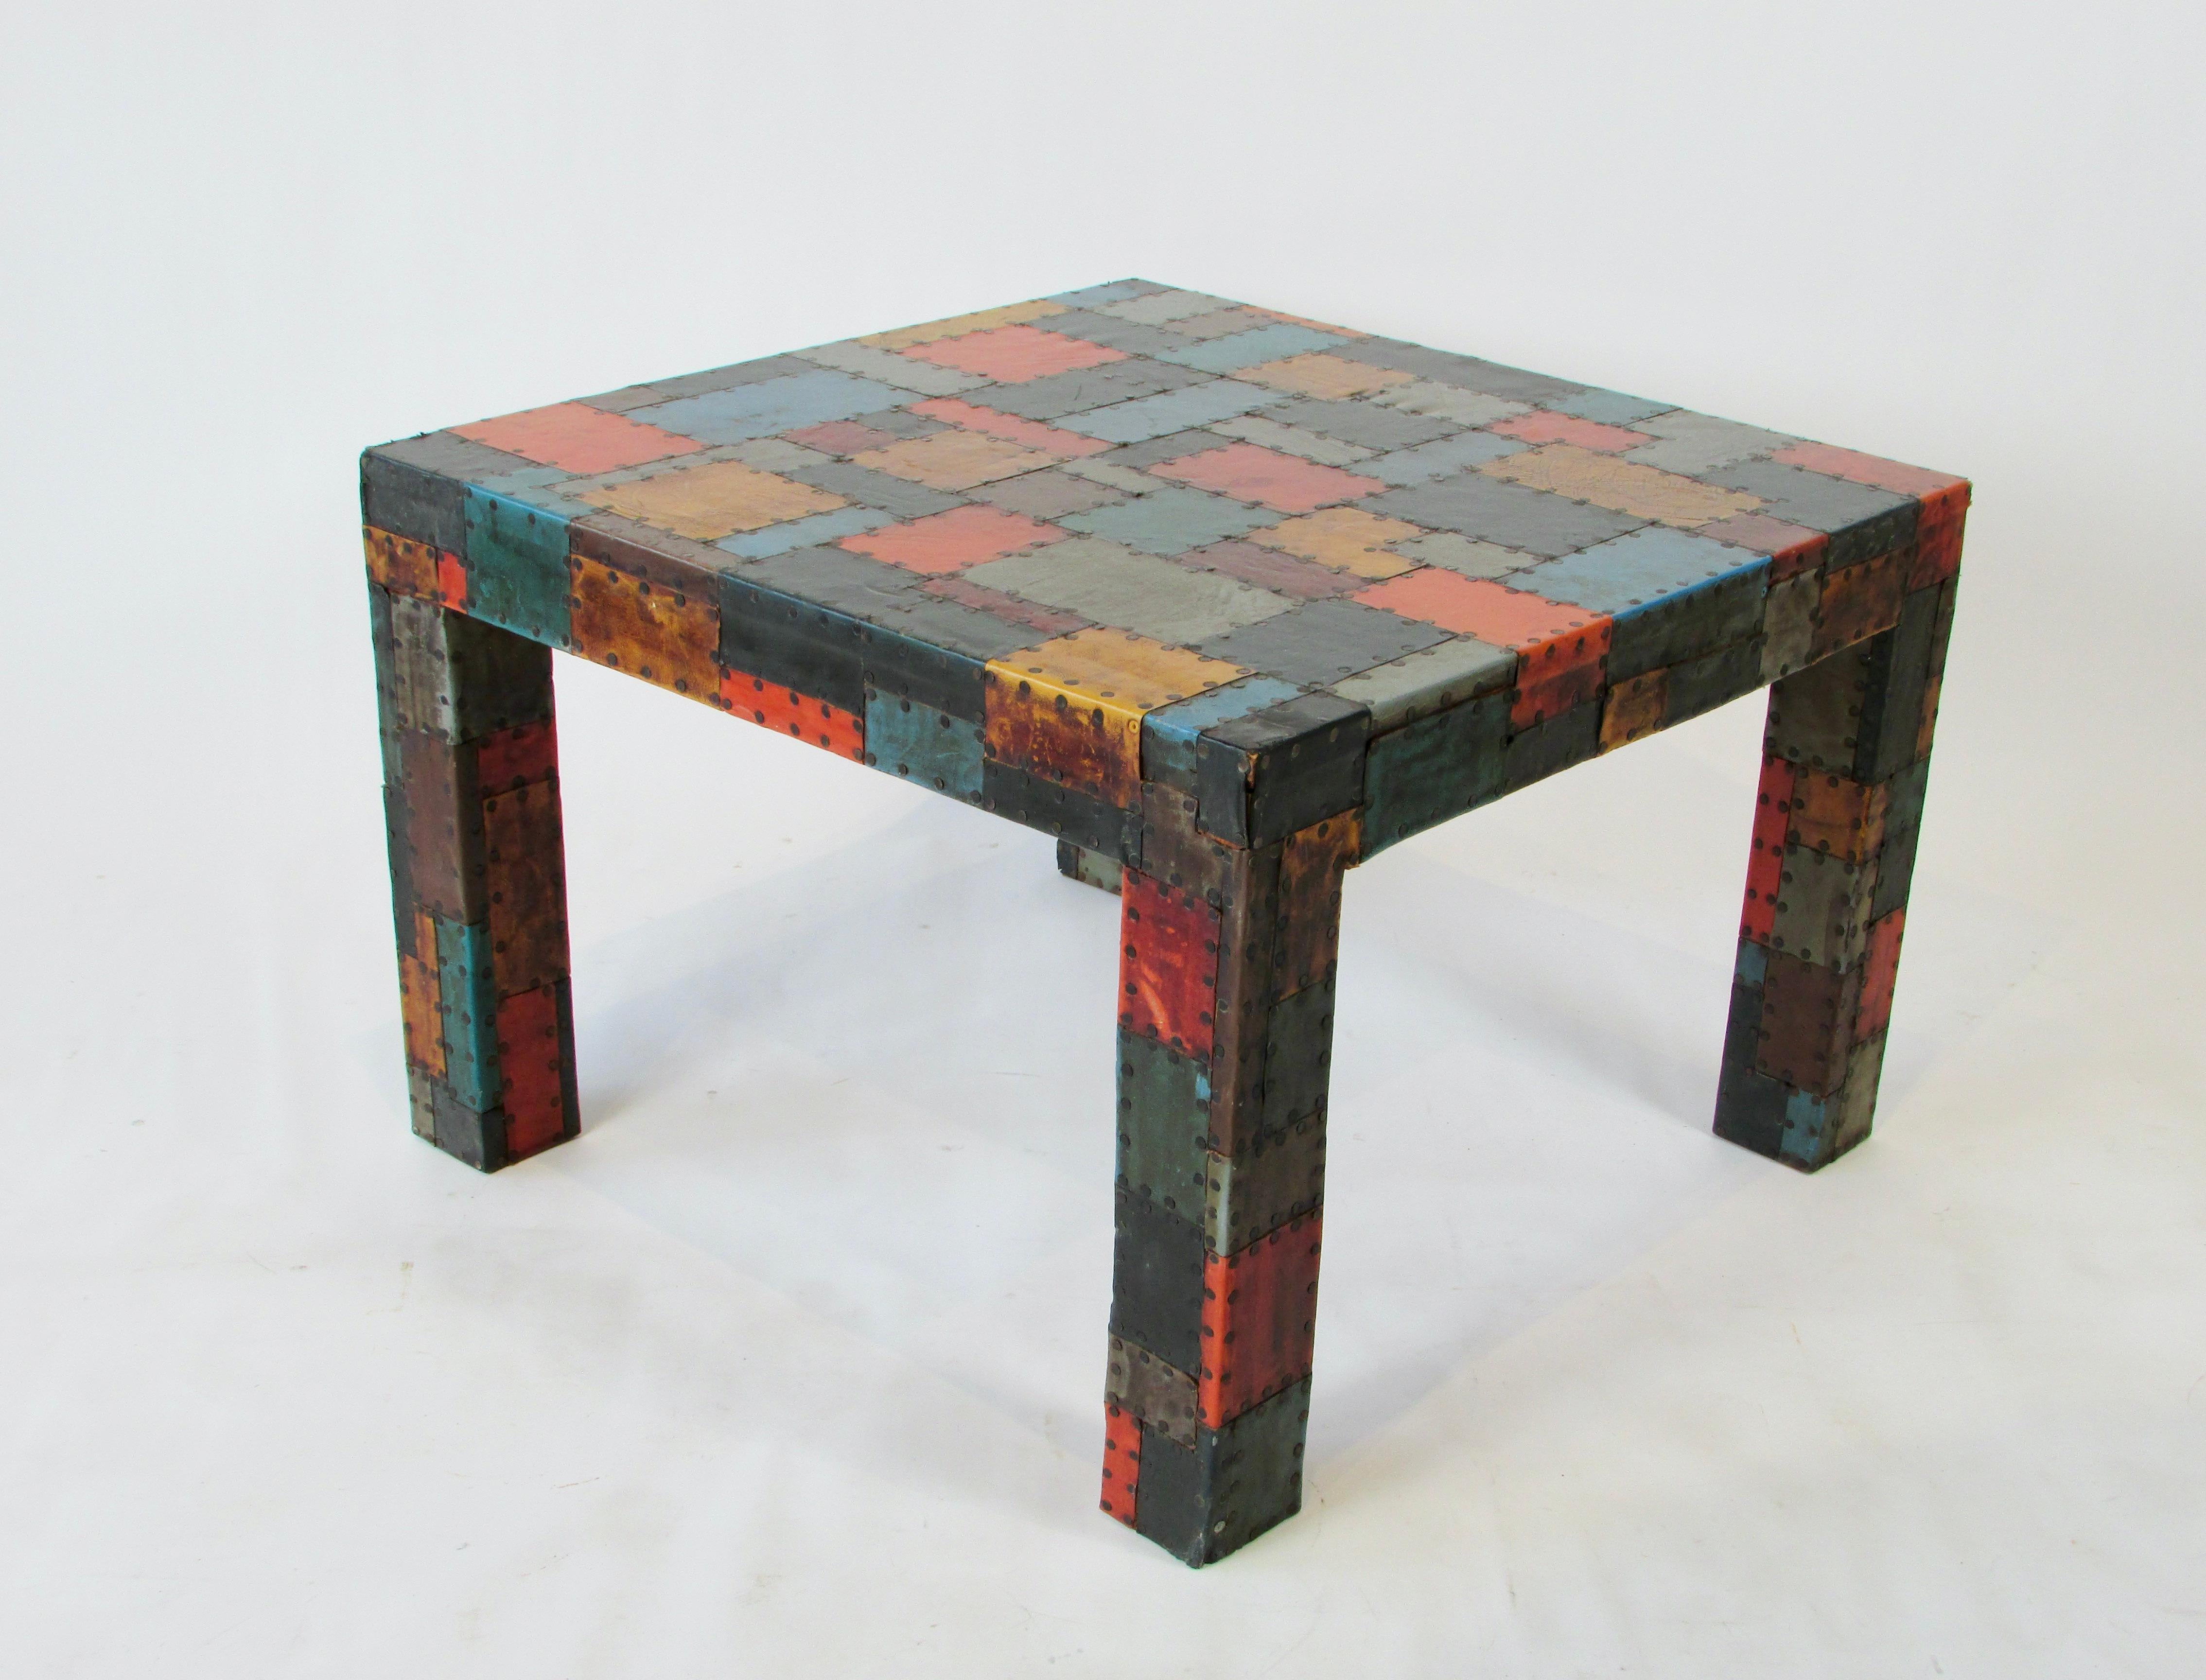 Organic 1960s Folk Art Table with Hammered Nail Multi Color Leather Patchwork In Good Condition For Sale In Ferndale, MI